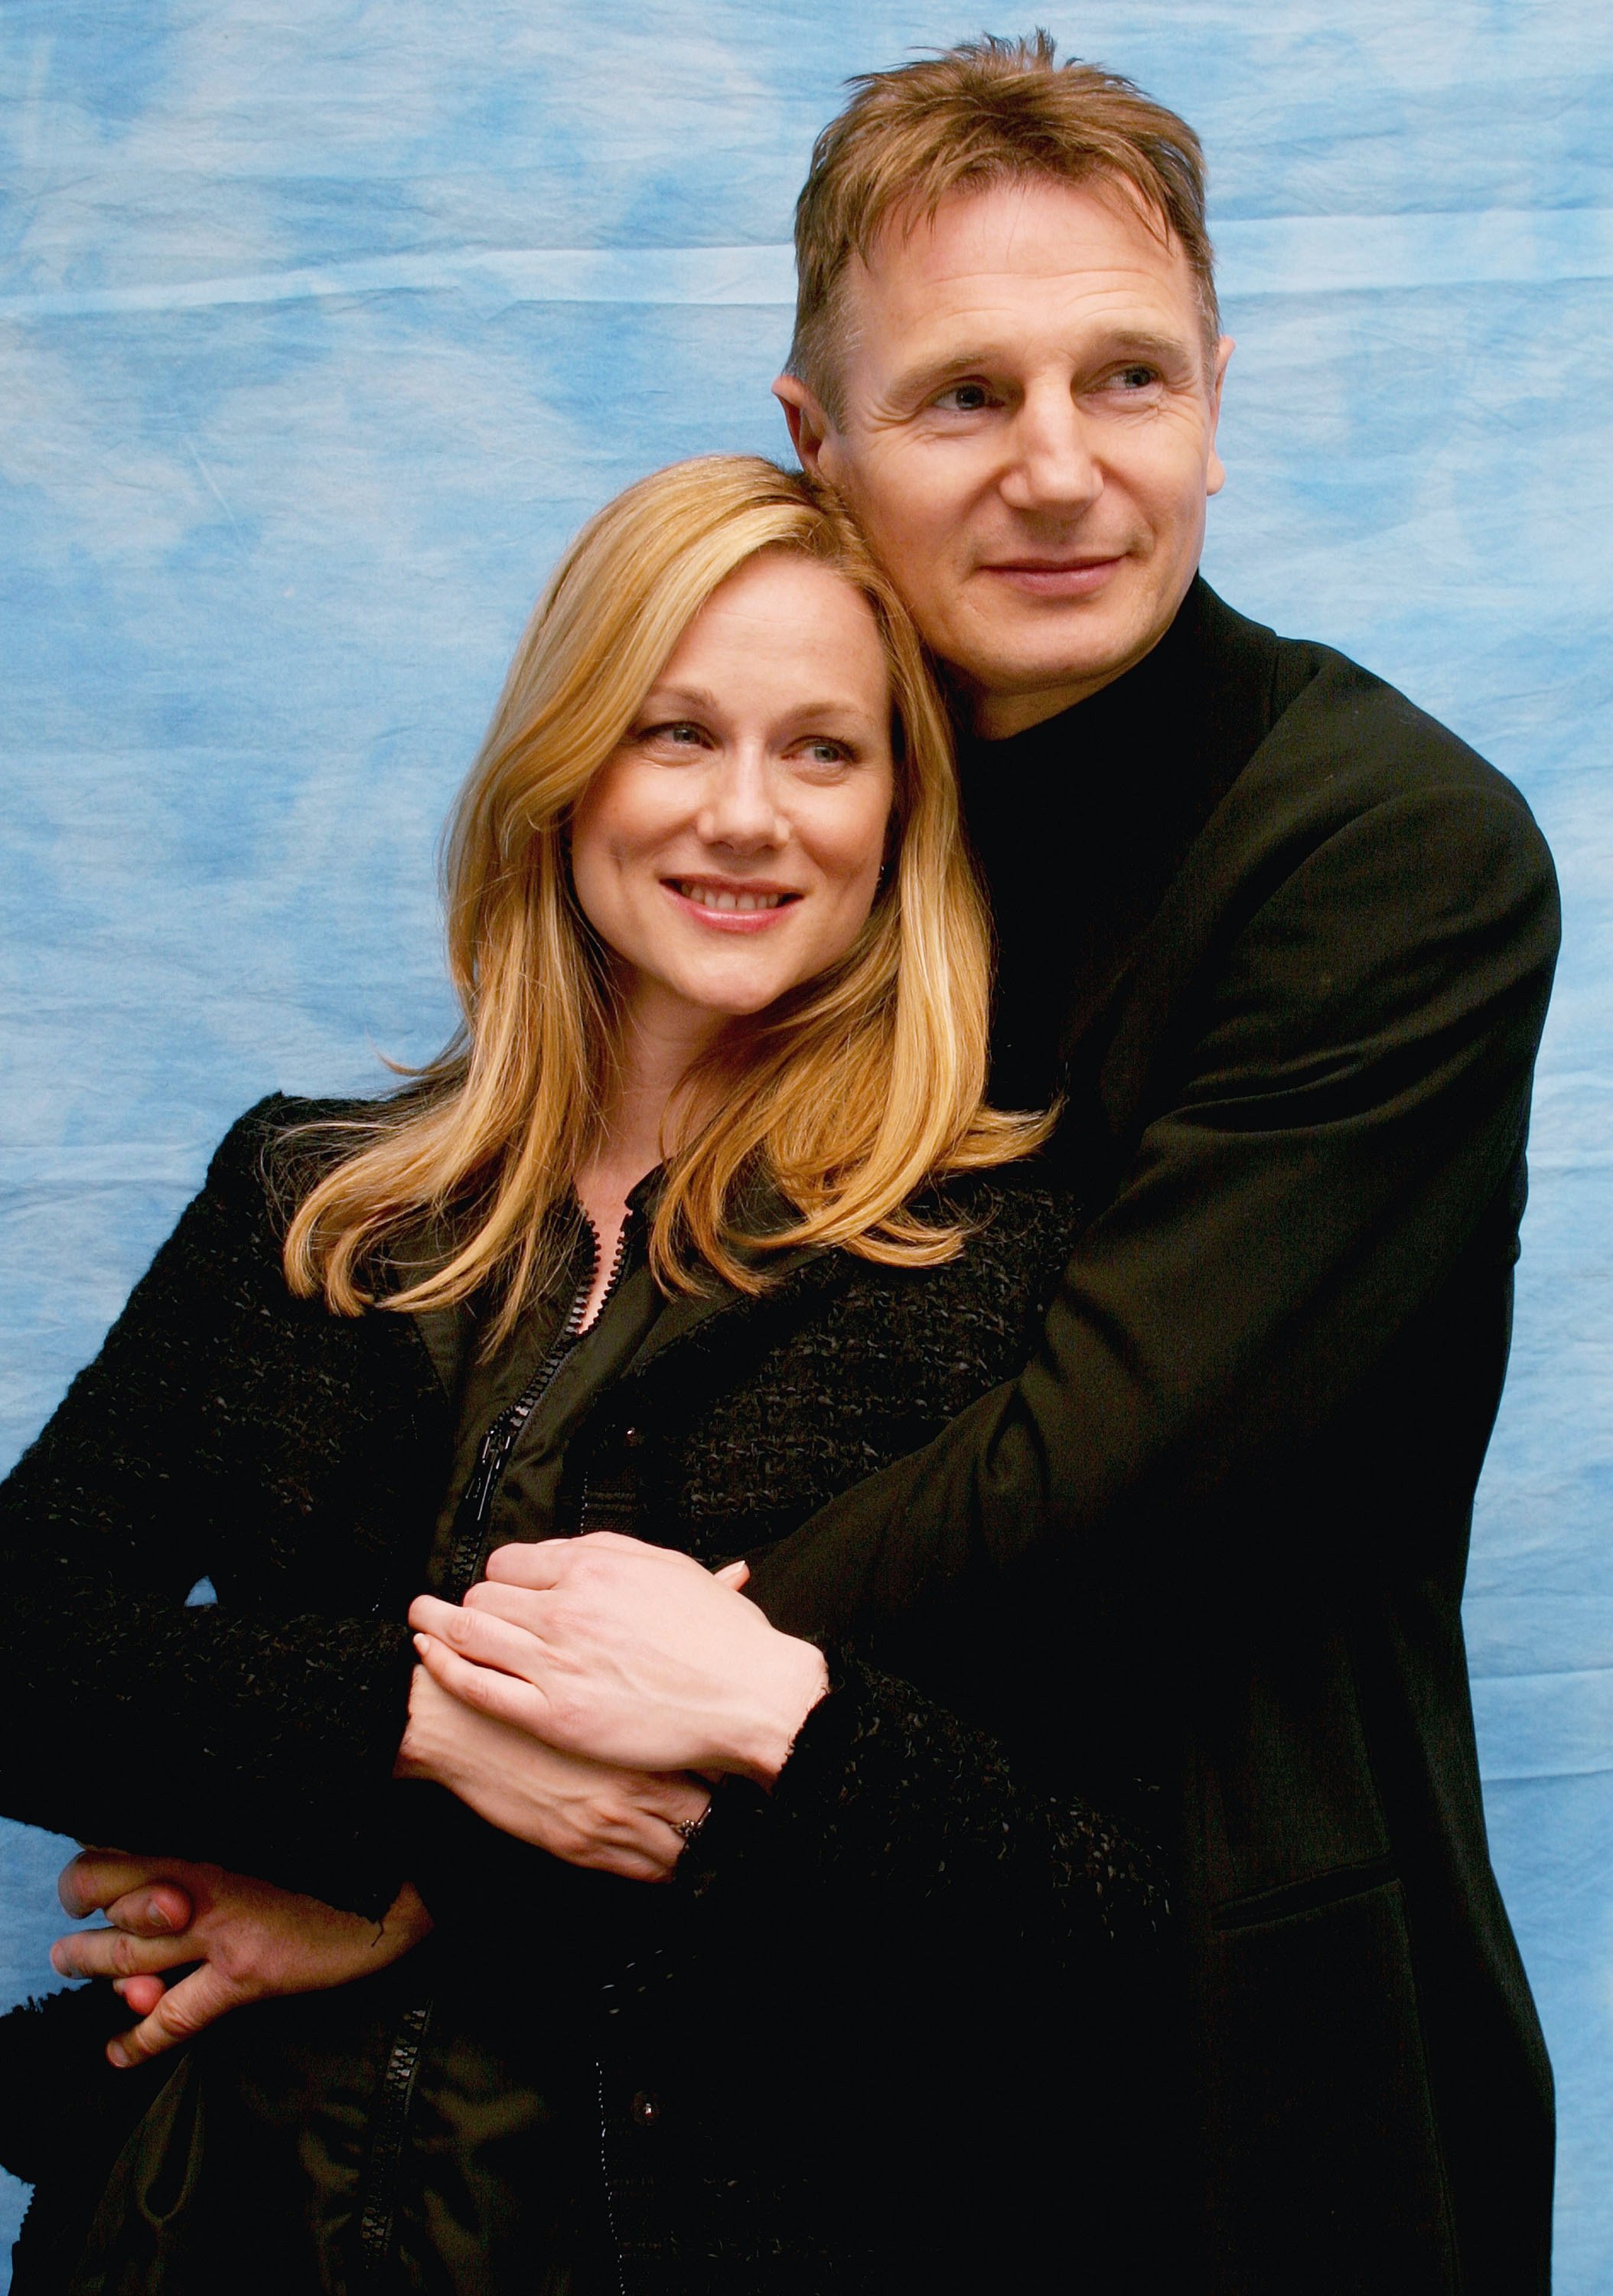 Laura Linney and Liam Neeson during a press conference for their film "Love Actually" at the Dorchester Hotel on October 10, 2003 in London, England. / Source: Getty Images